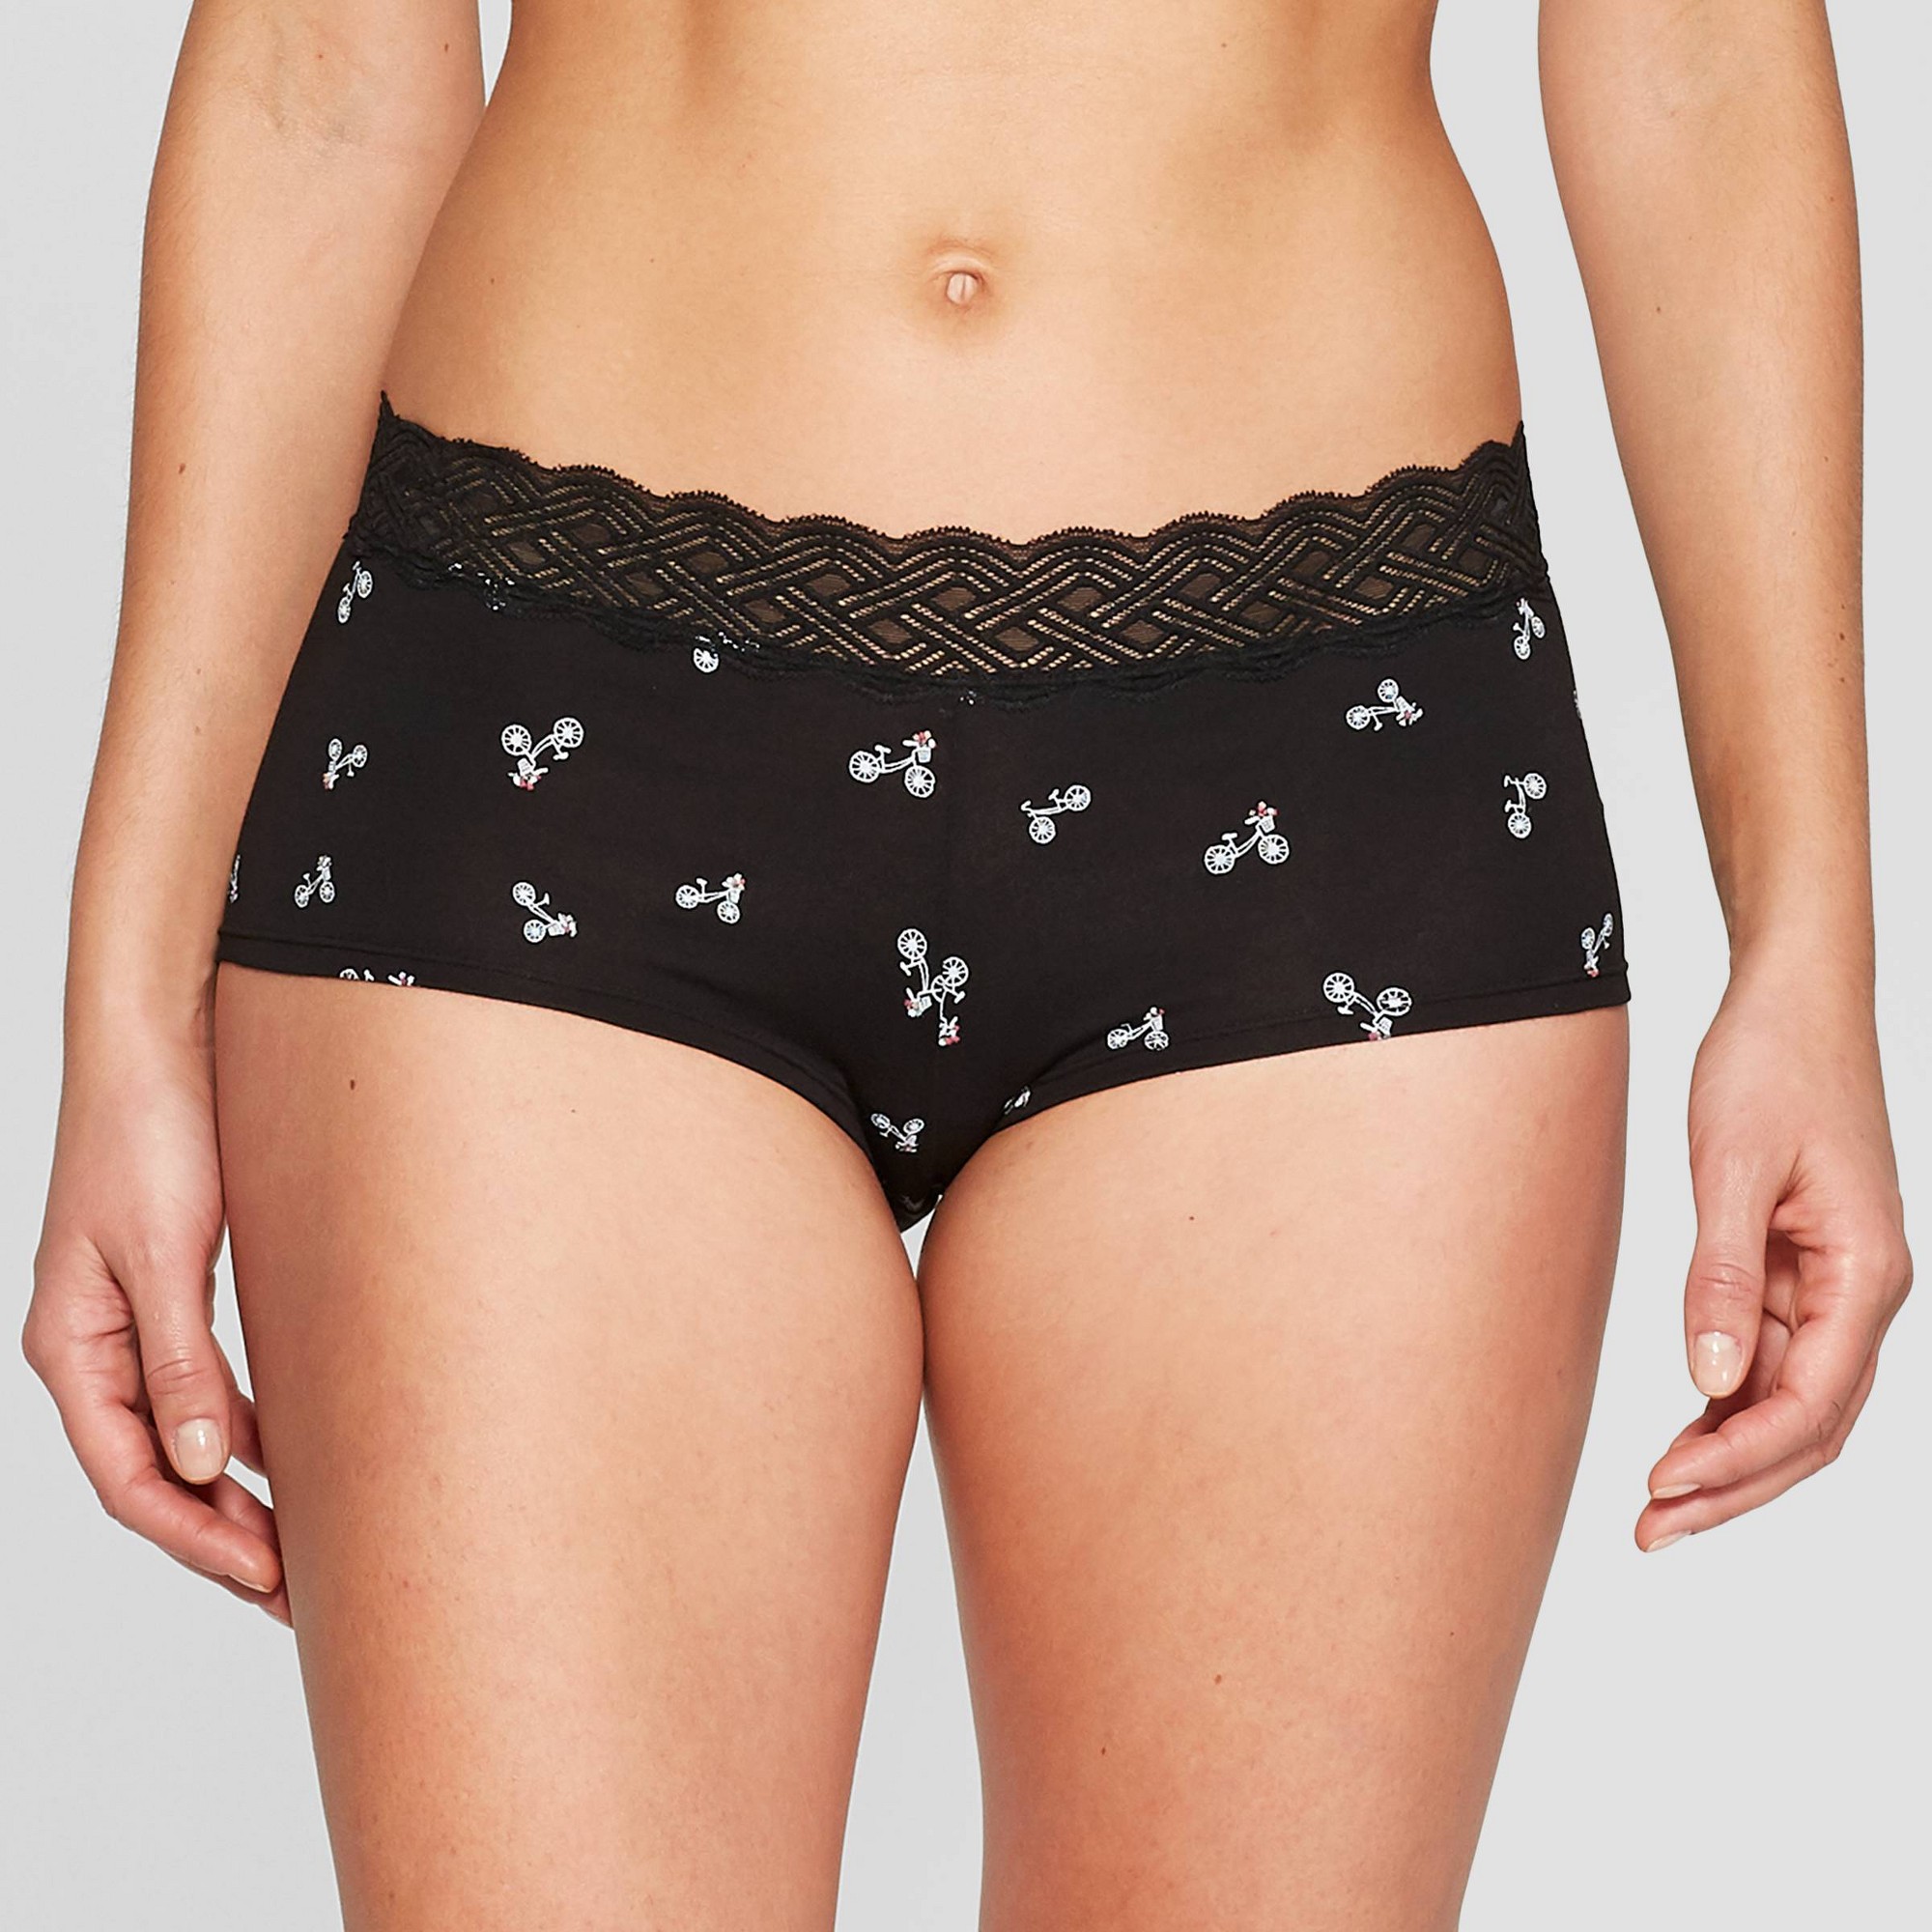 Women's Cotton Boyshorts with Lace Waistband - Auden Black Bicycle Print  XL, by Auden